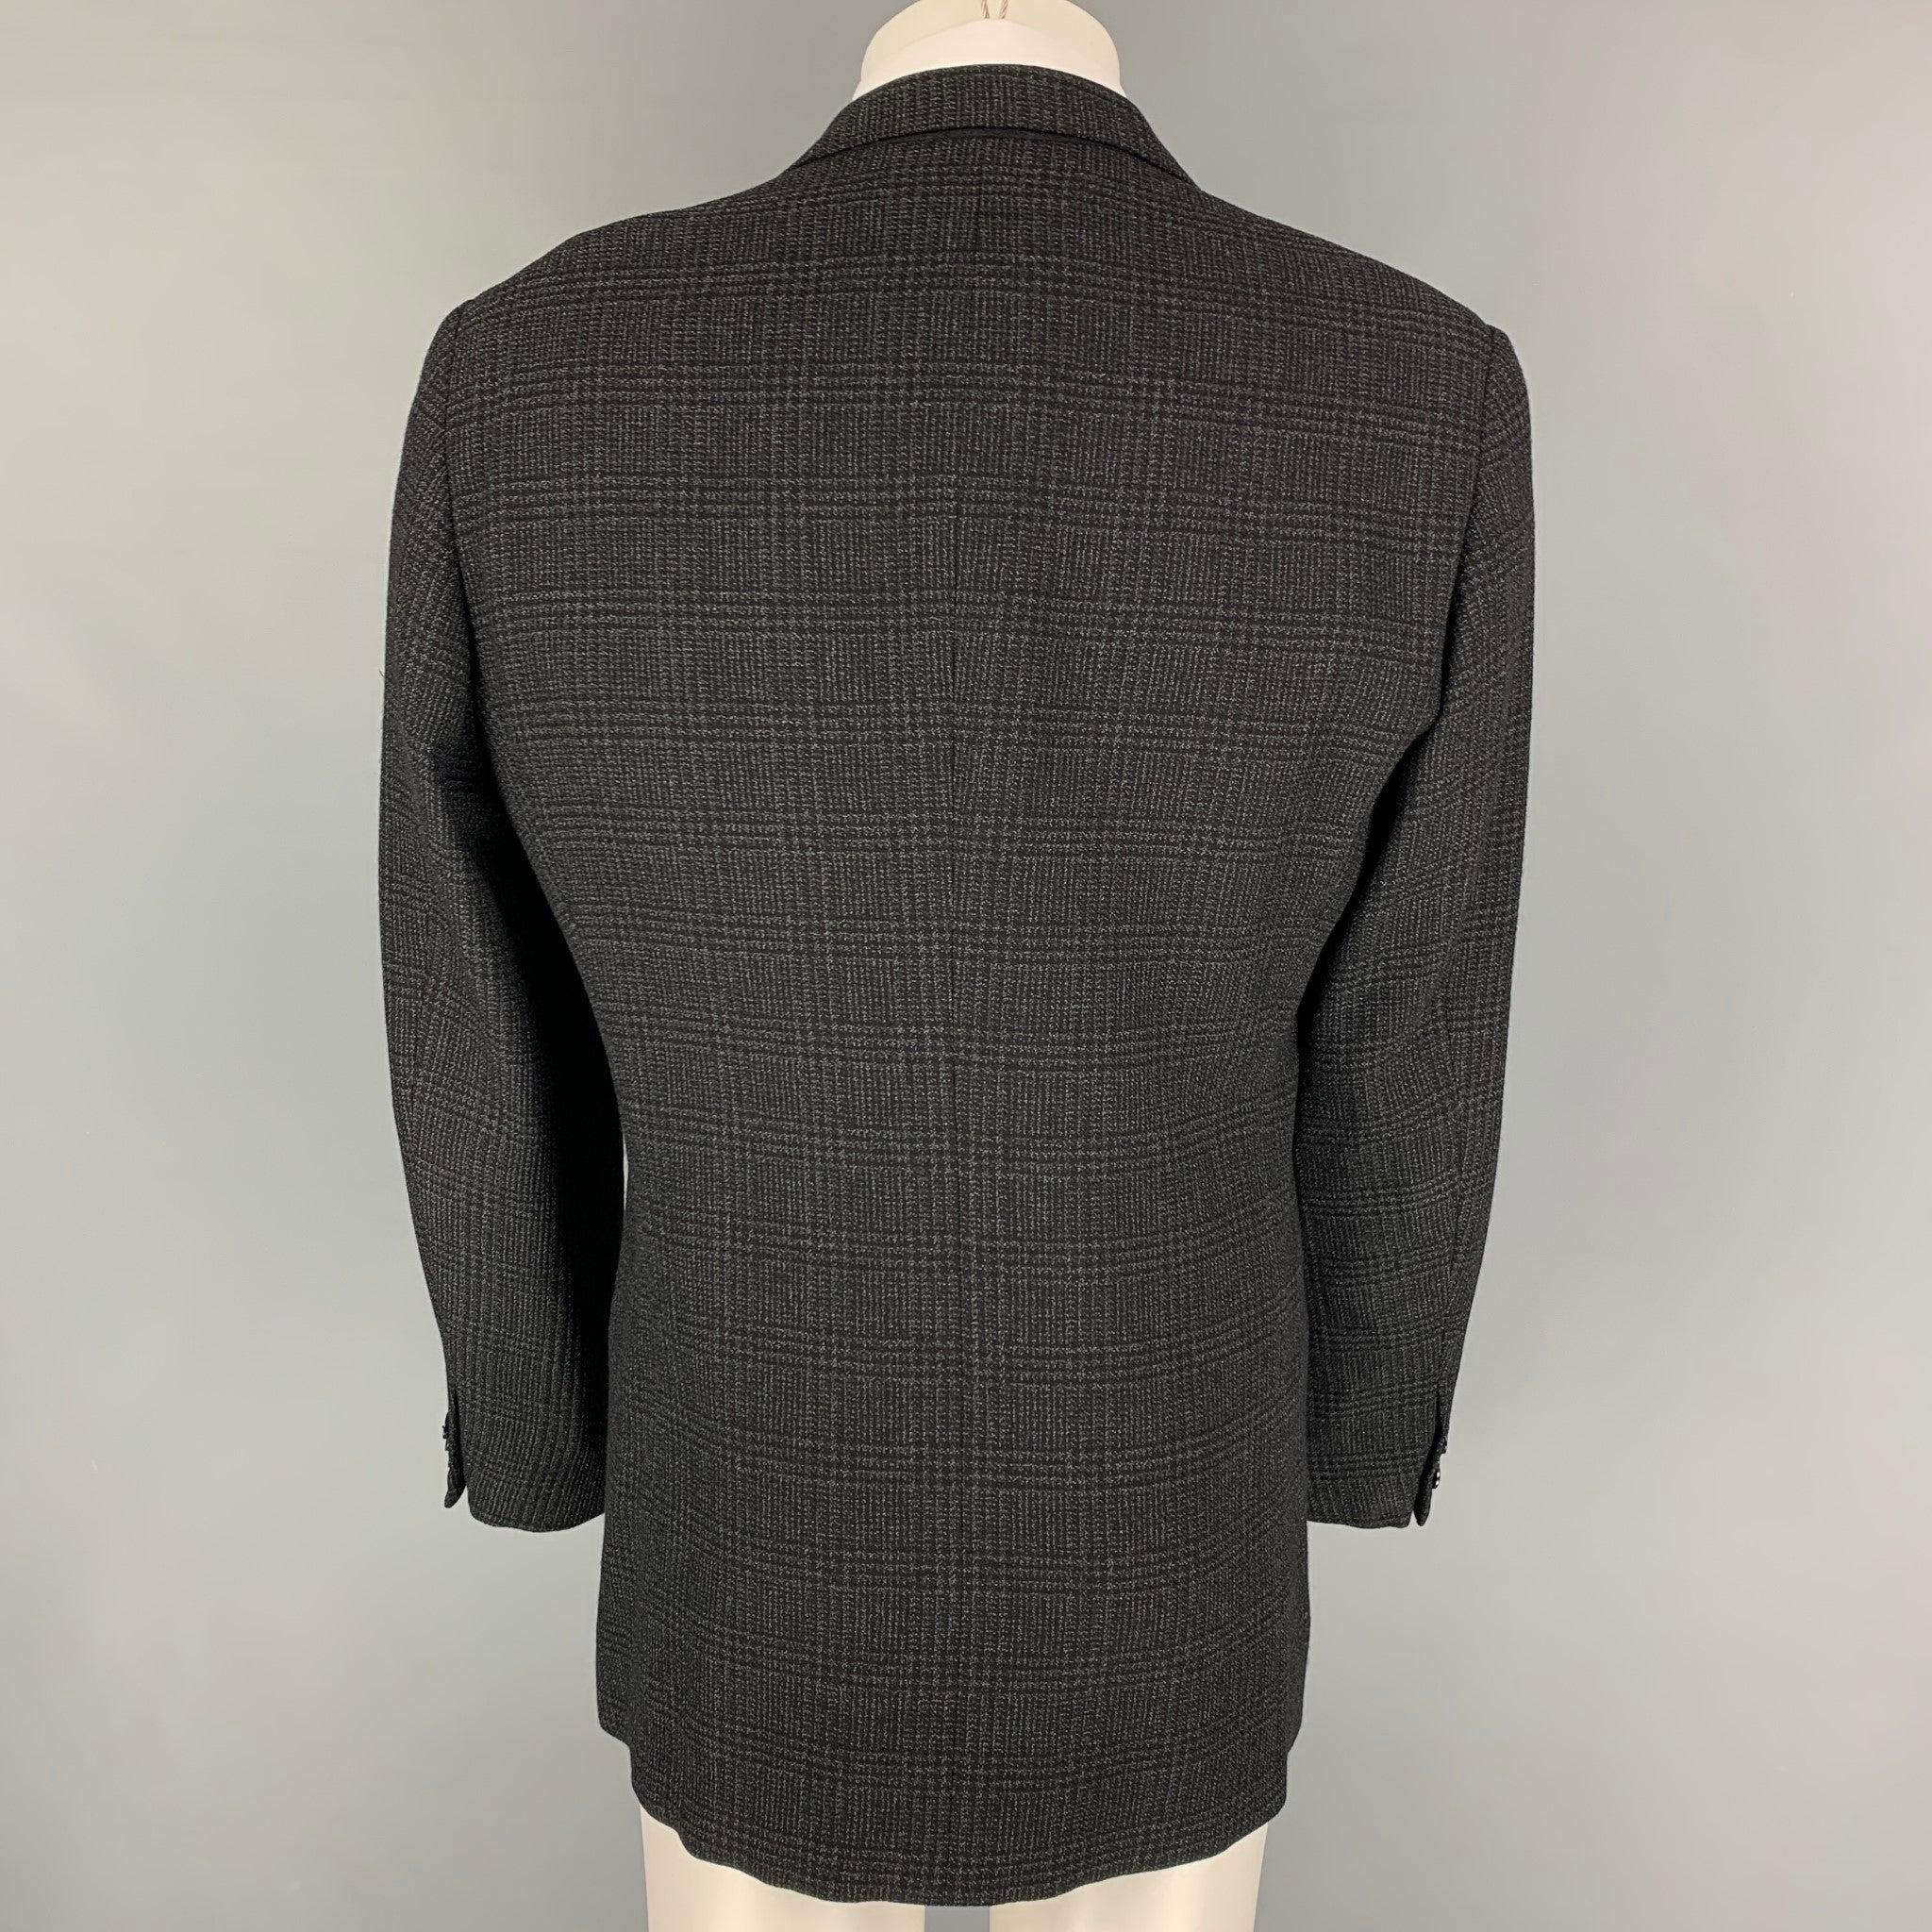 ARMANI COLLEZIONI Size 40 Charcoal Black Plaid Wool Sport Coat In Good Condition For Sale In San Francisco, CA